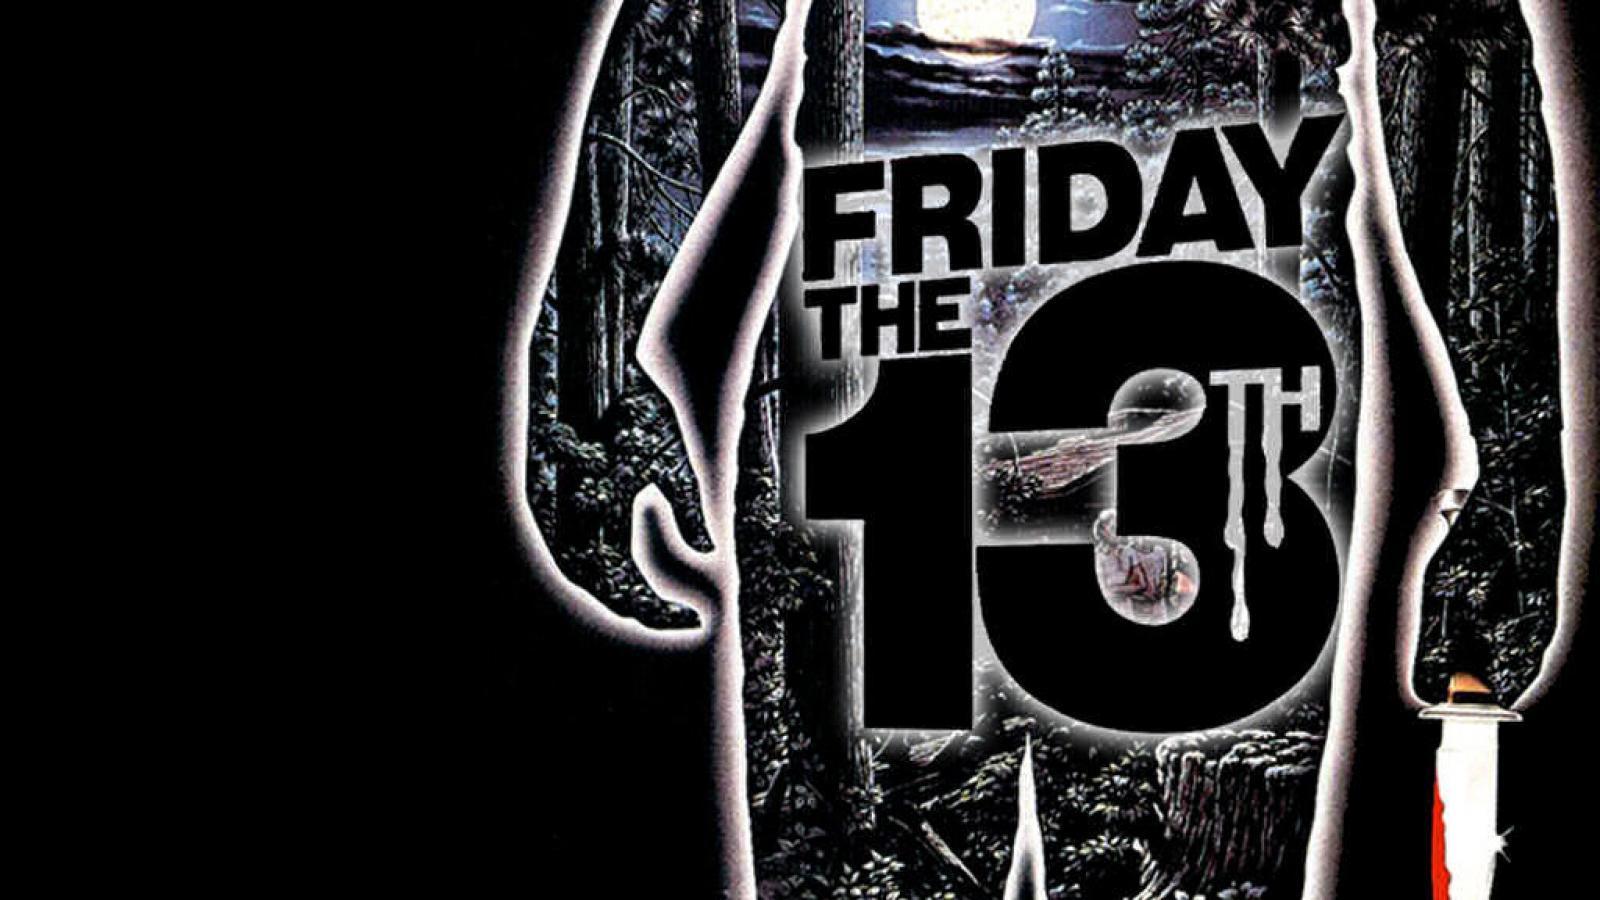 friday the 13th horror movies #rSH